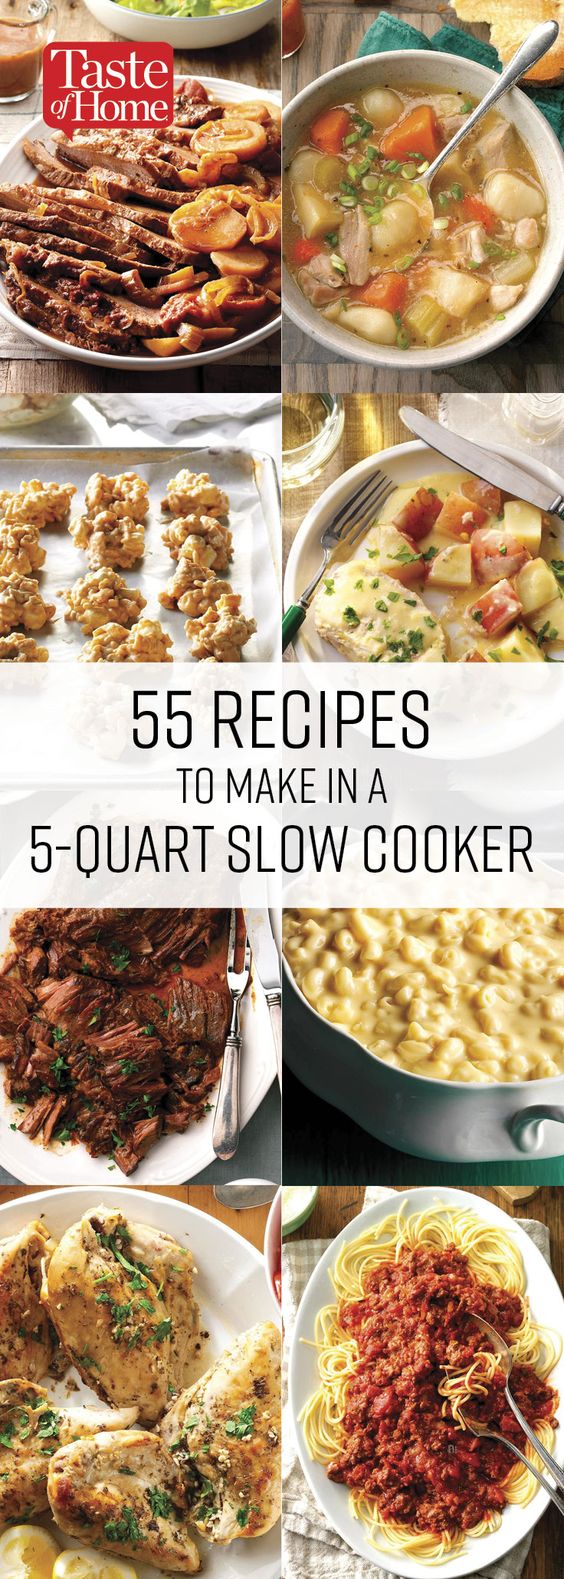 55 Recipes to Make in a 5-Quart Slow Cooker